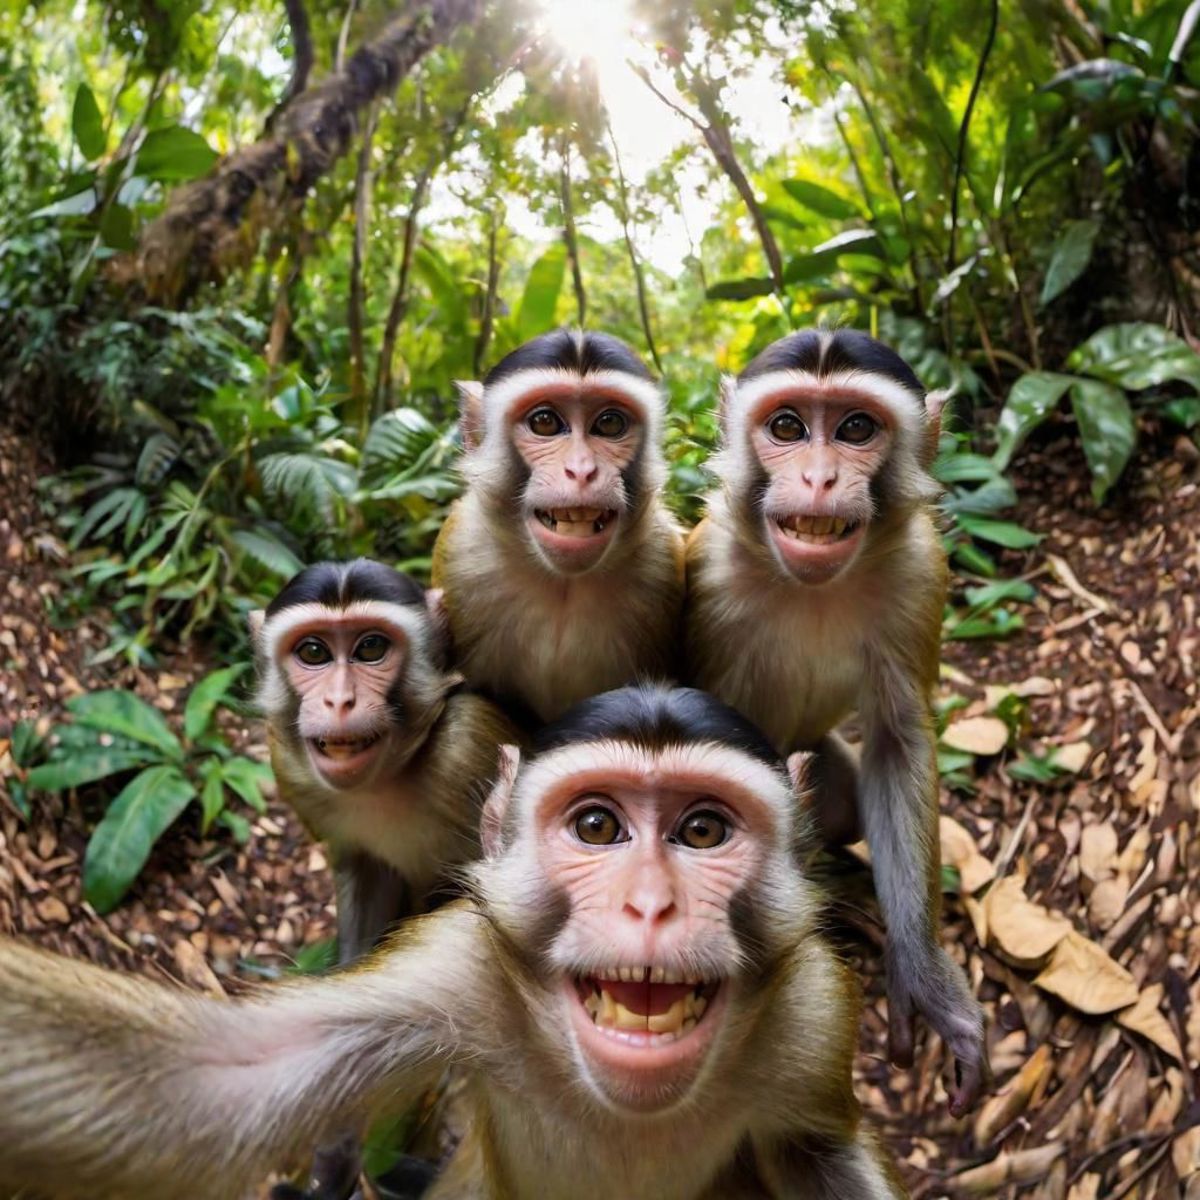 A group of five monkeys posing for a photo in a forest.